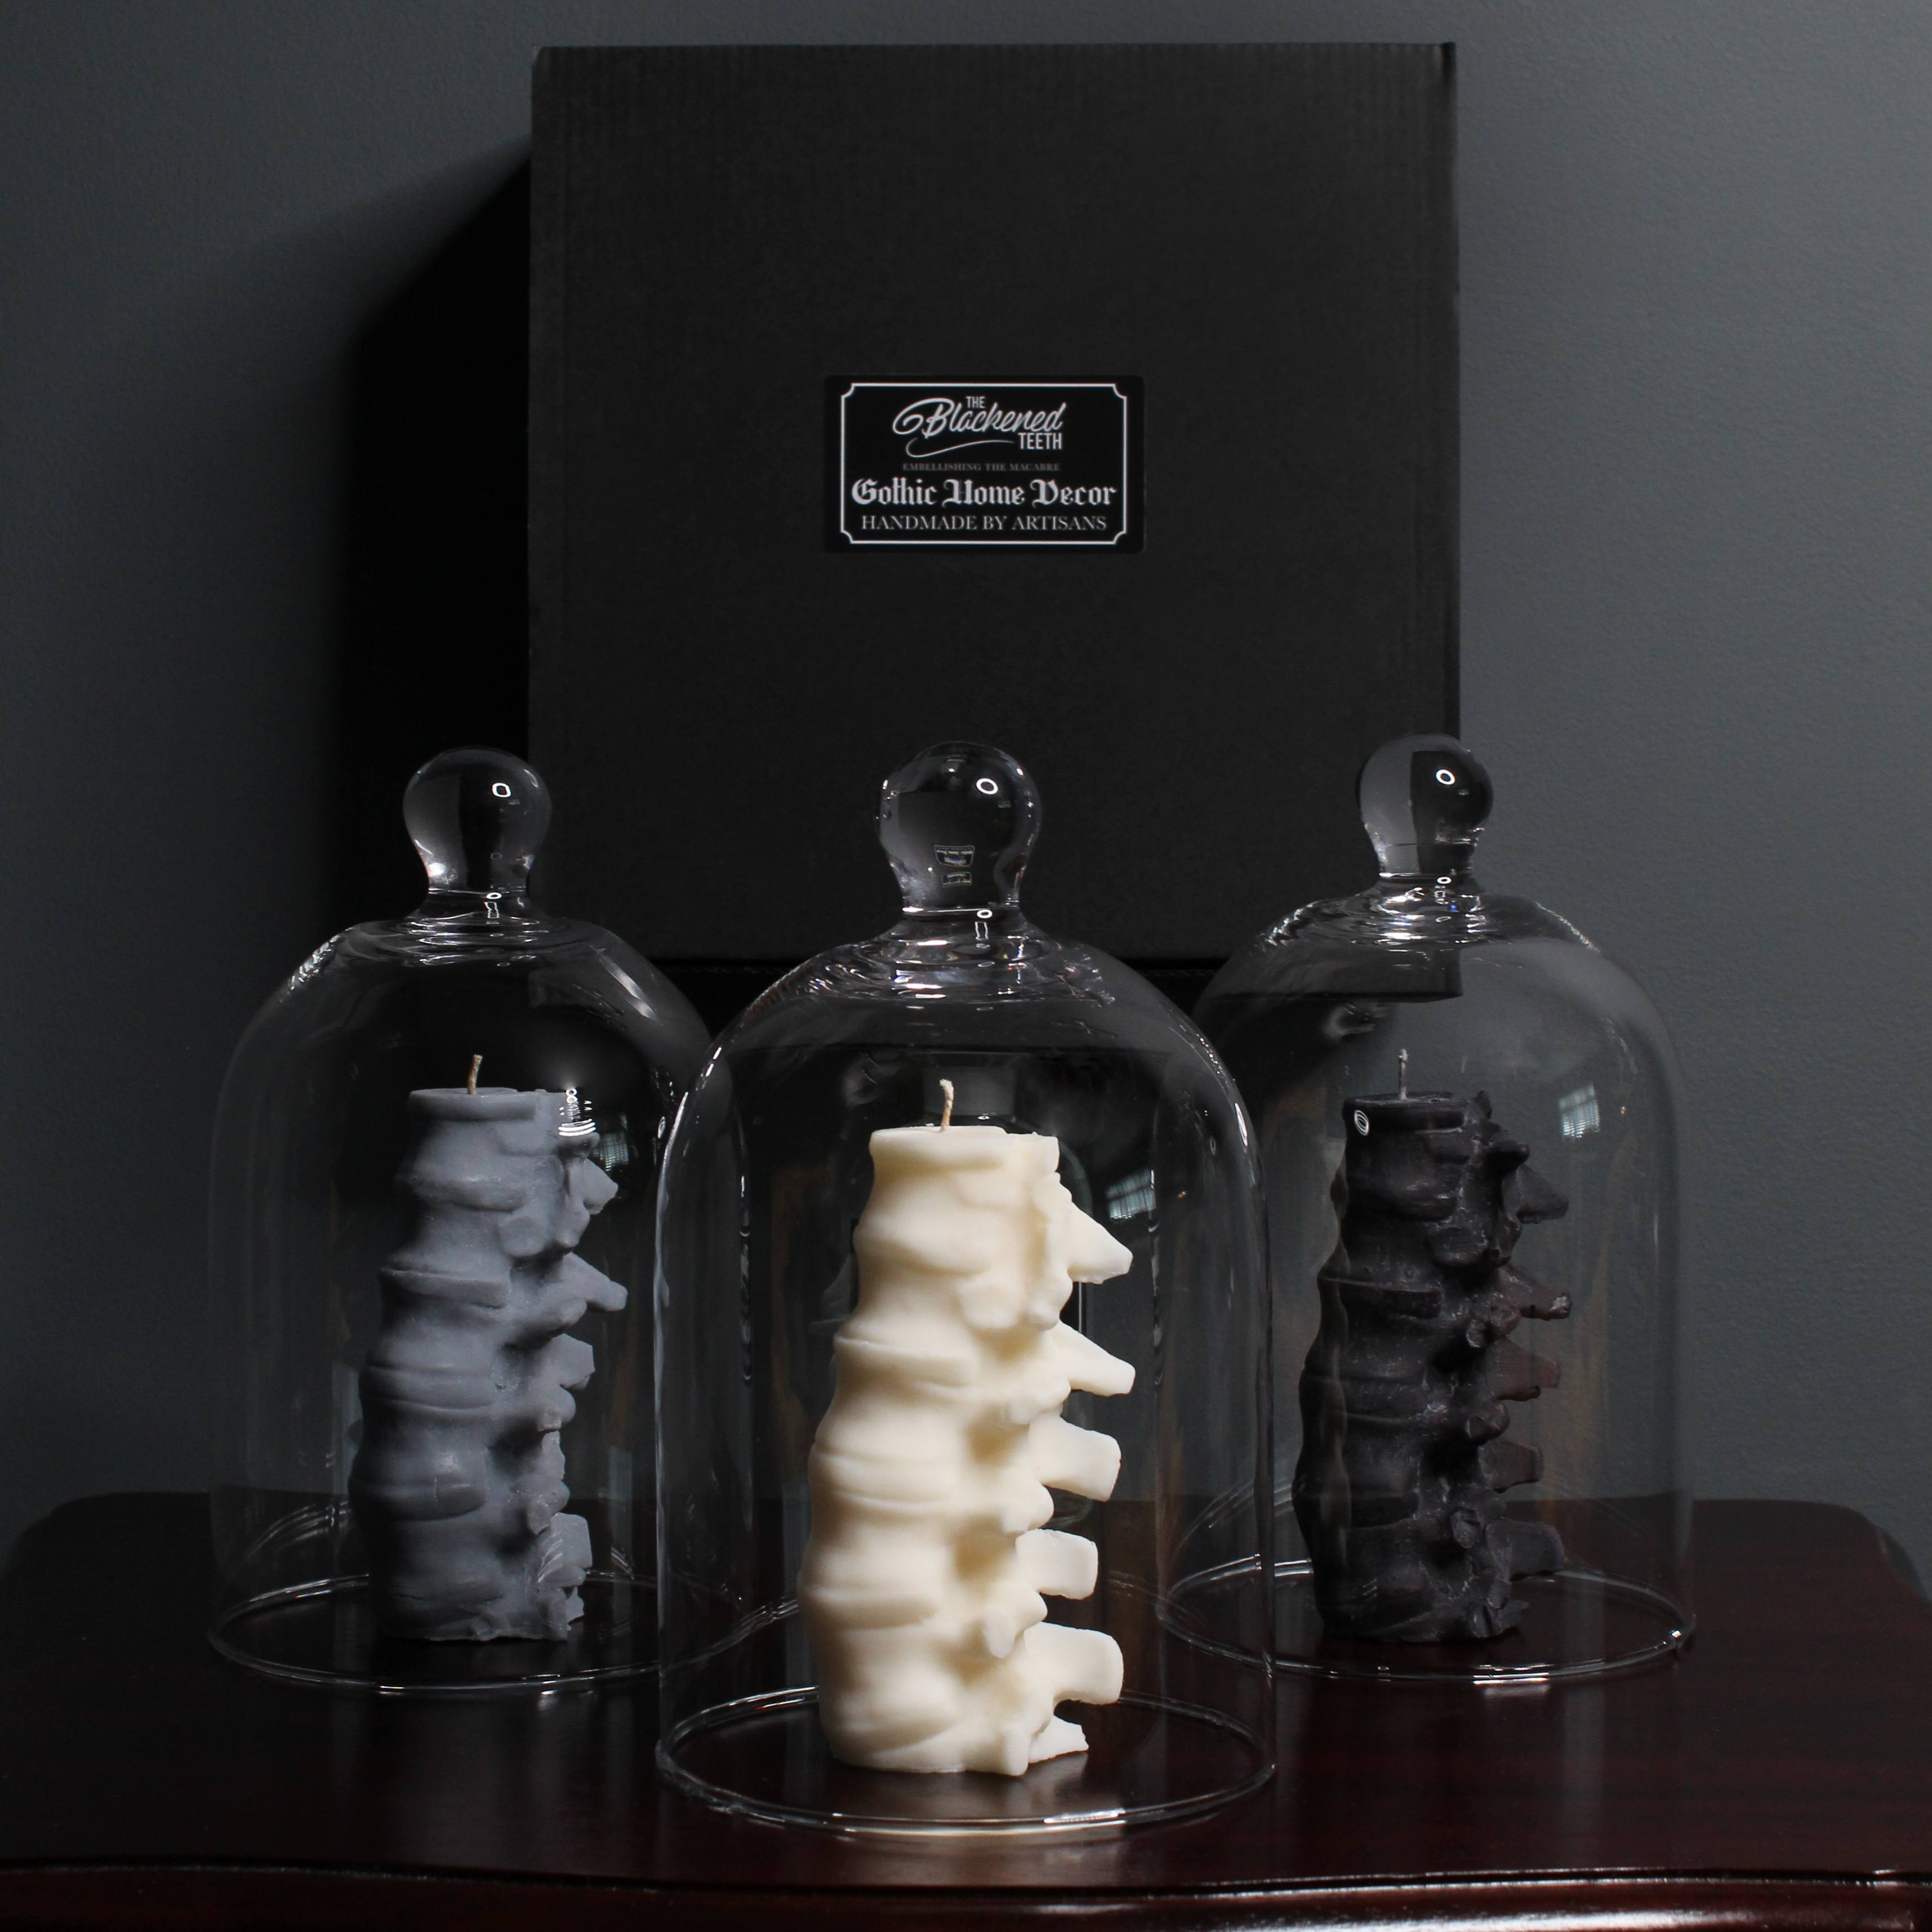 Spine candles gift box - The Blackened Teeth